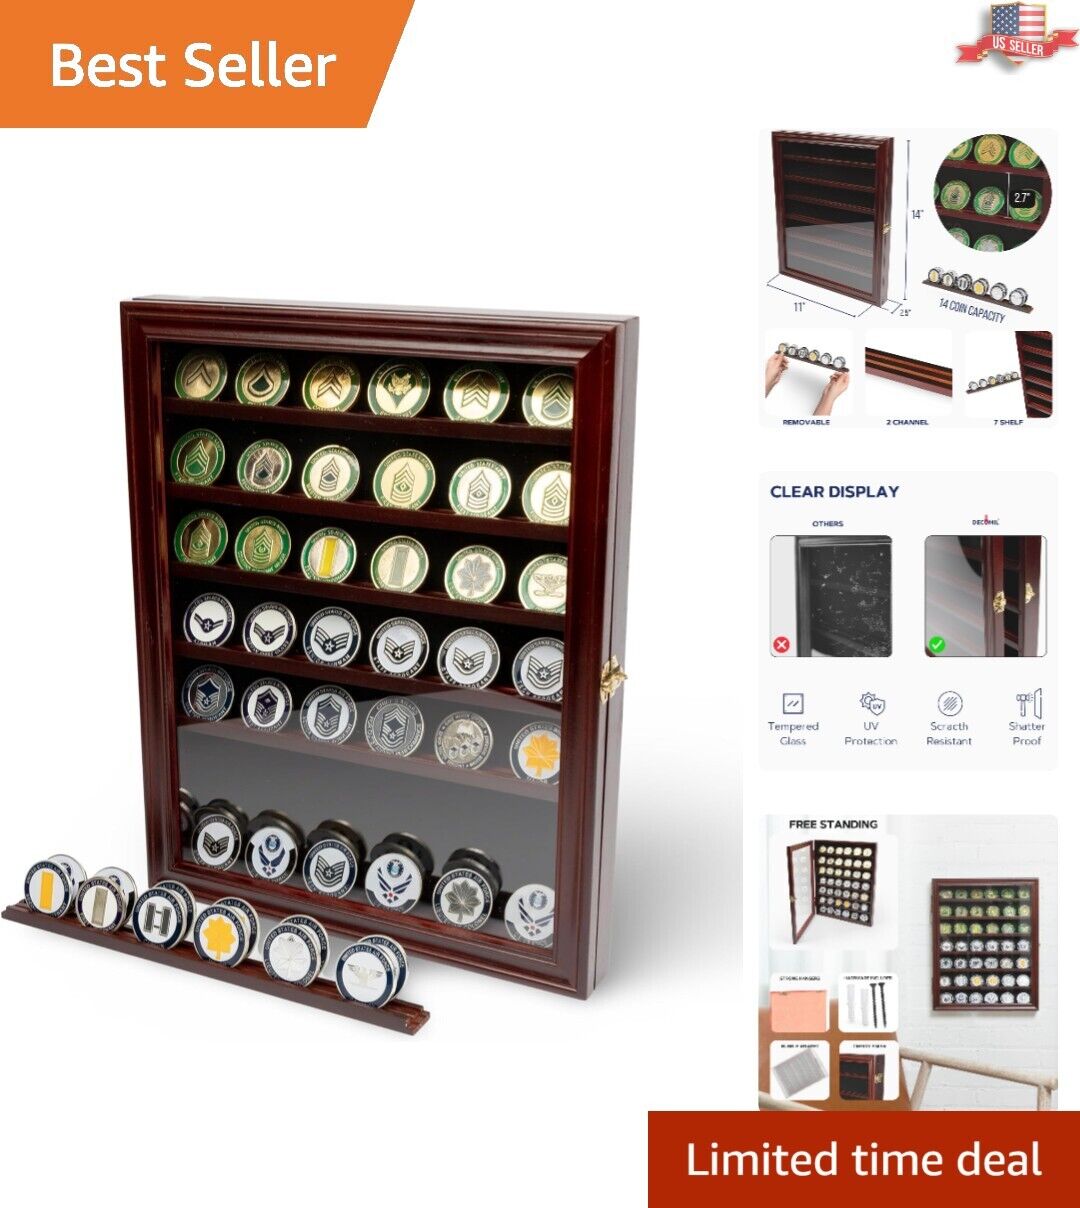 Luxurious Collectible Display Cabinet for Military Challenge Coins - Cherry Wood